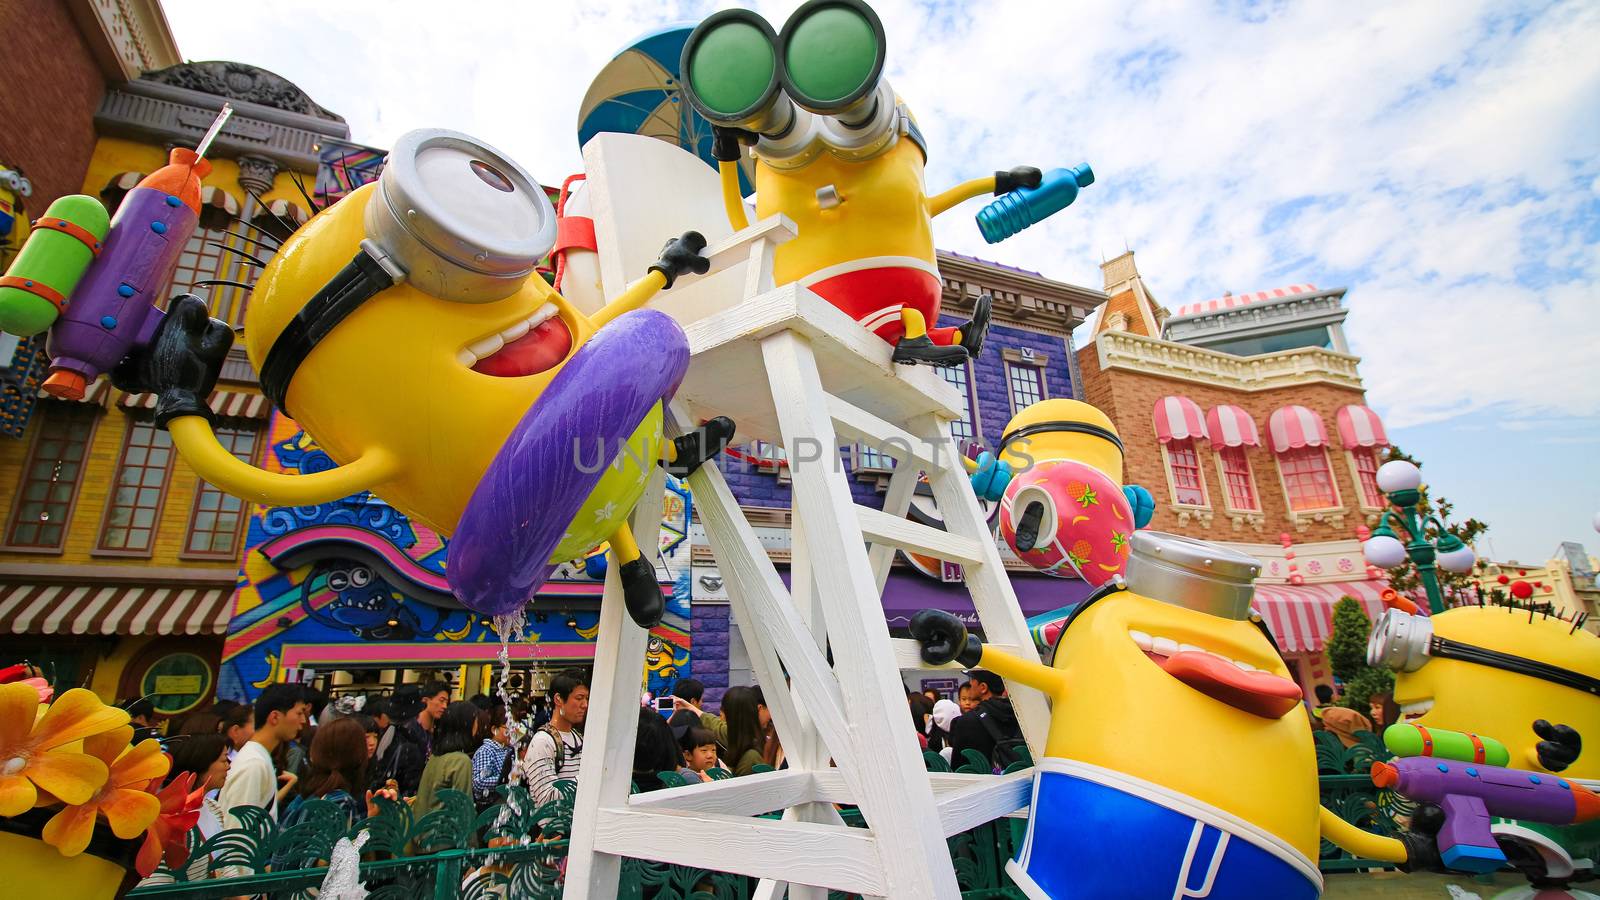 OSAKA, JAPAN - November 03, 2017 : Statue of MINIONS at MINION PARK ENTRANCE in Universal Studios JAPAN.  Minions are famous characters from Despicable Me animation.